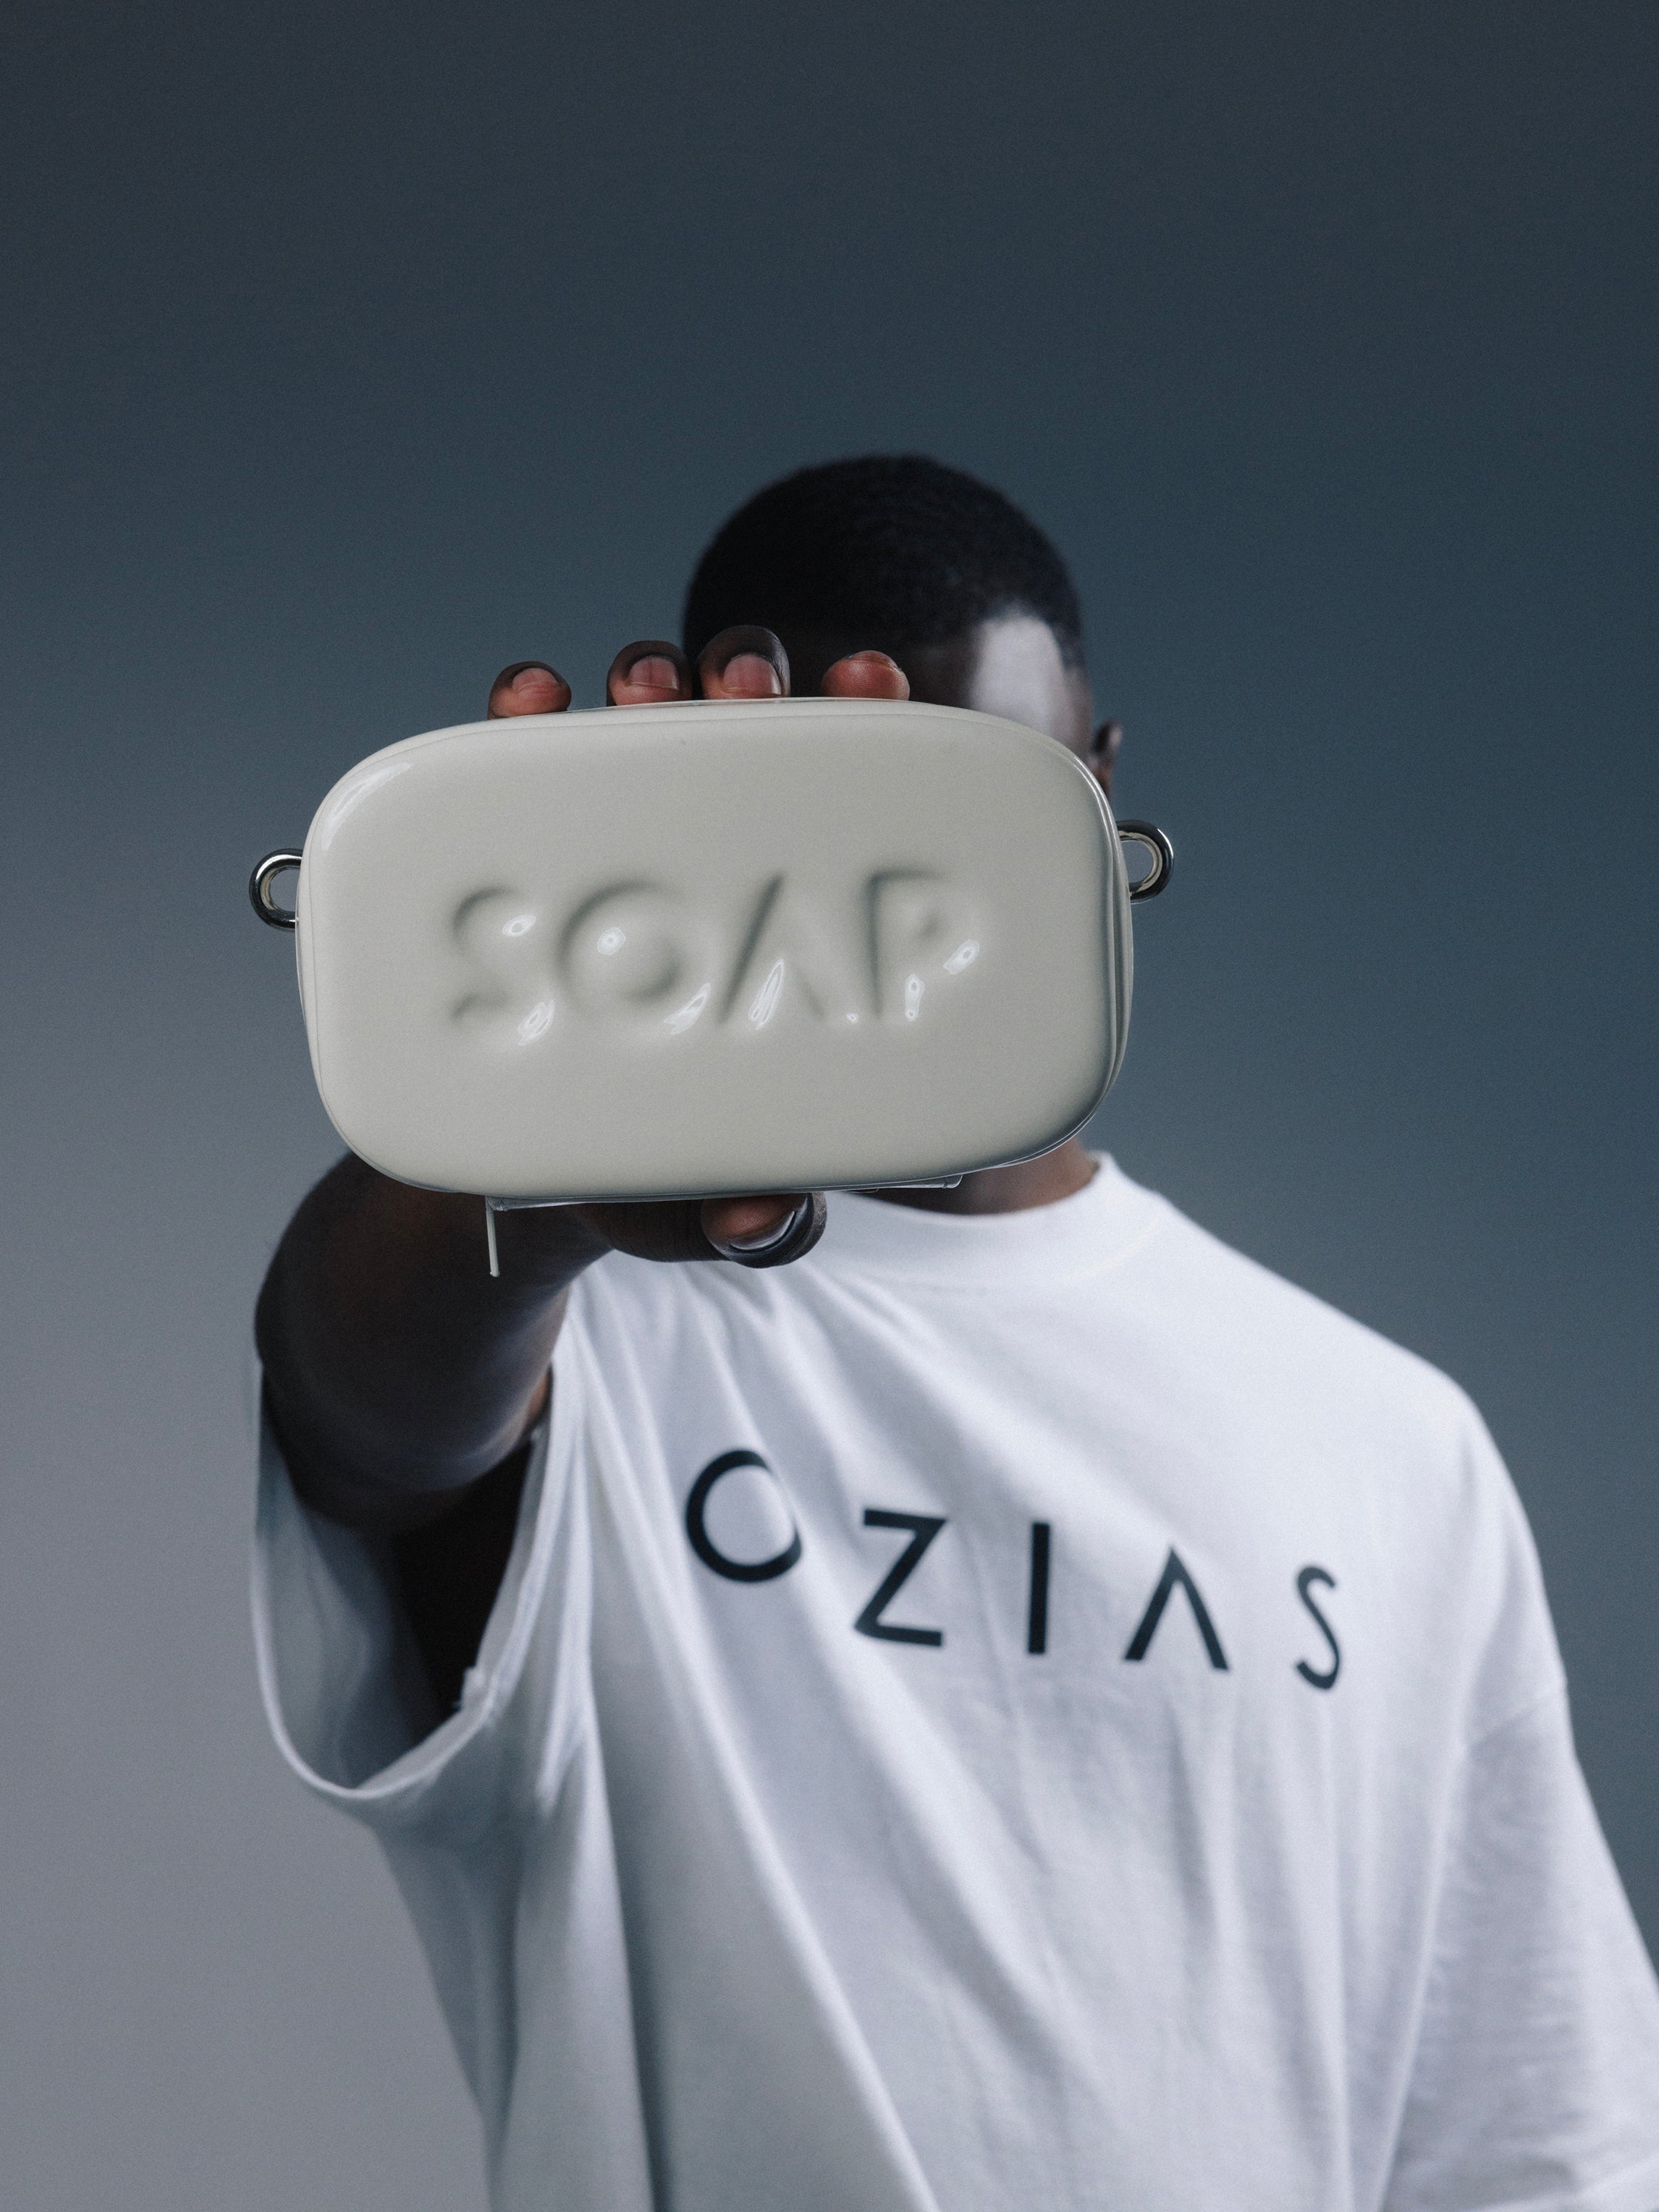 THE SOAP